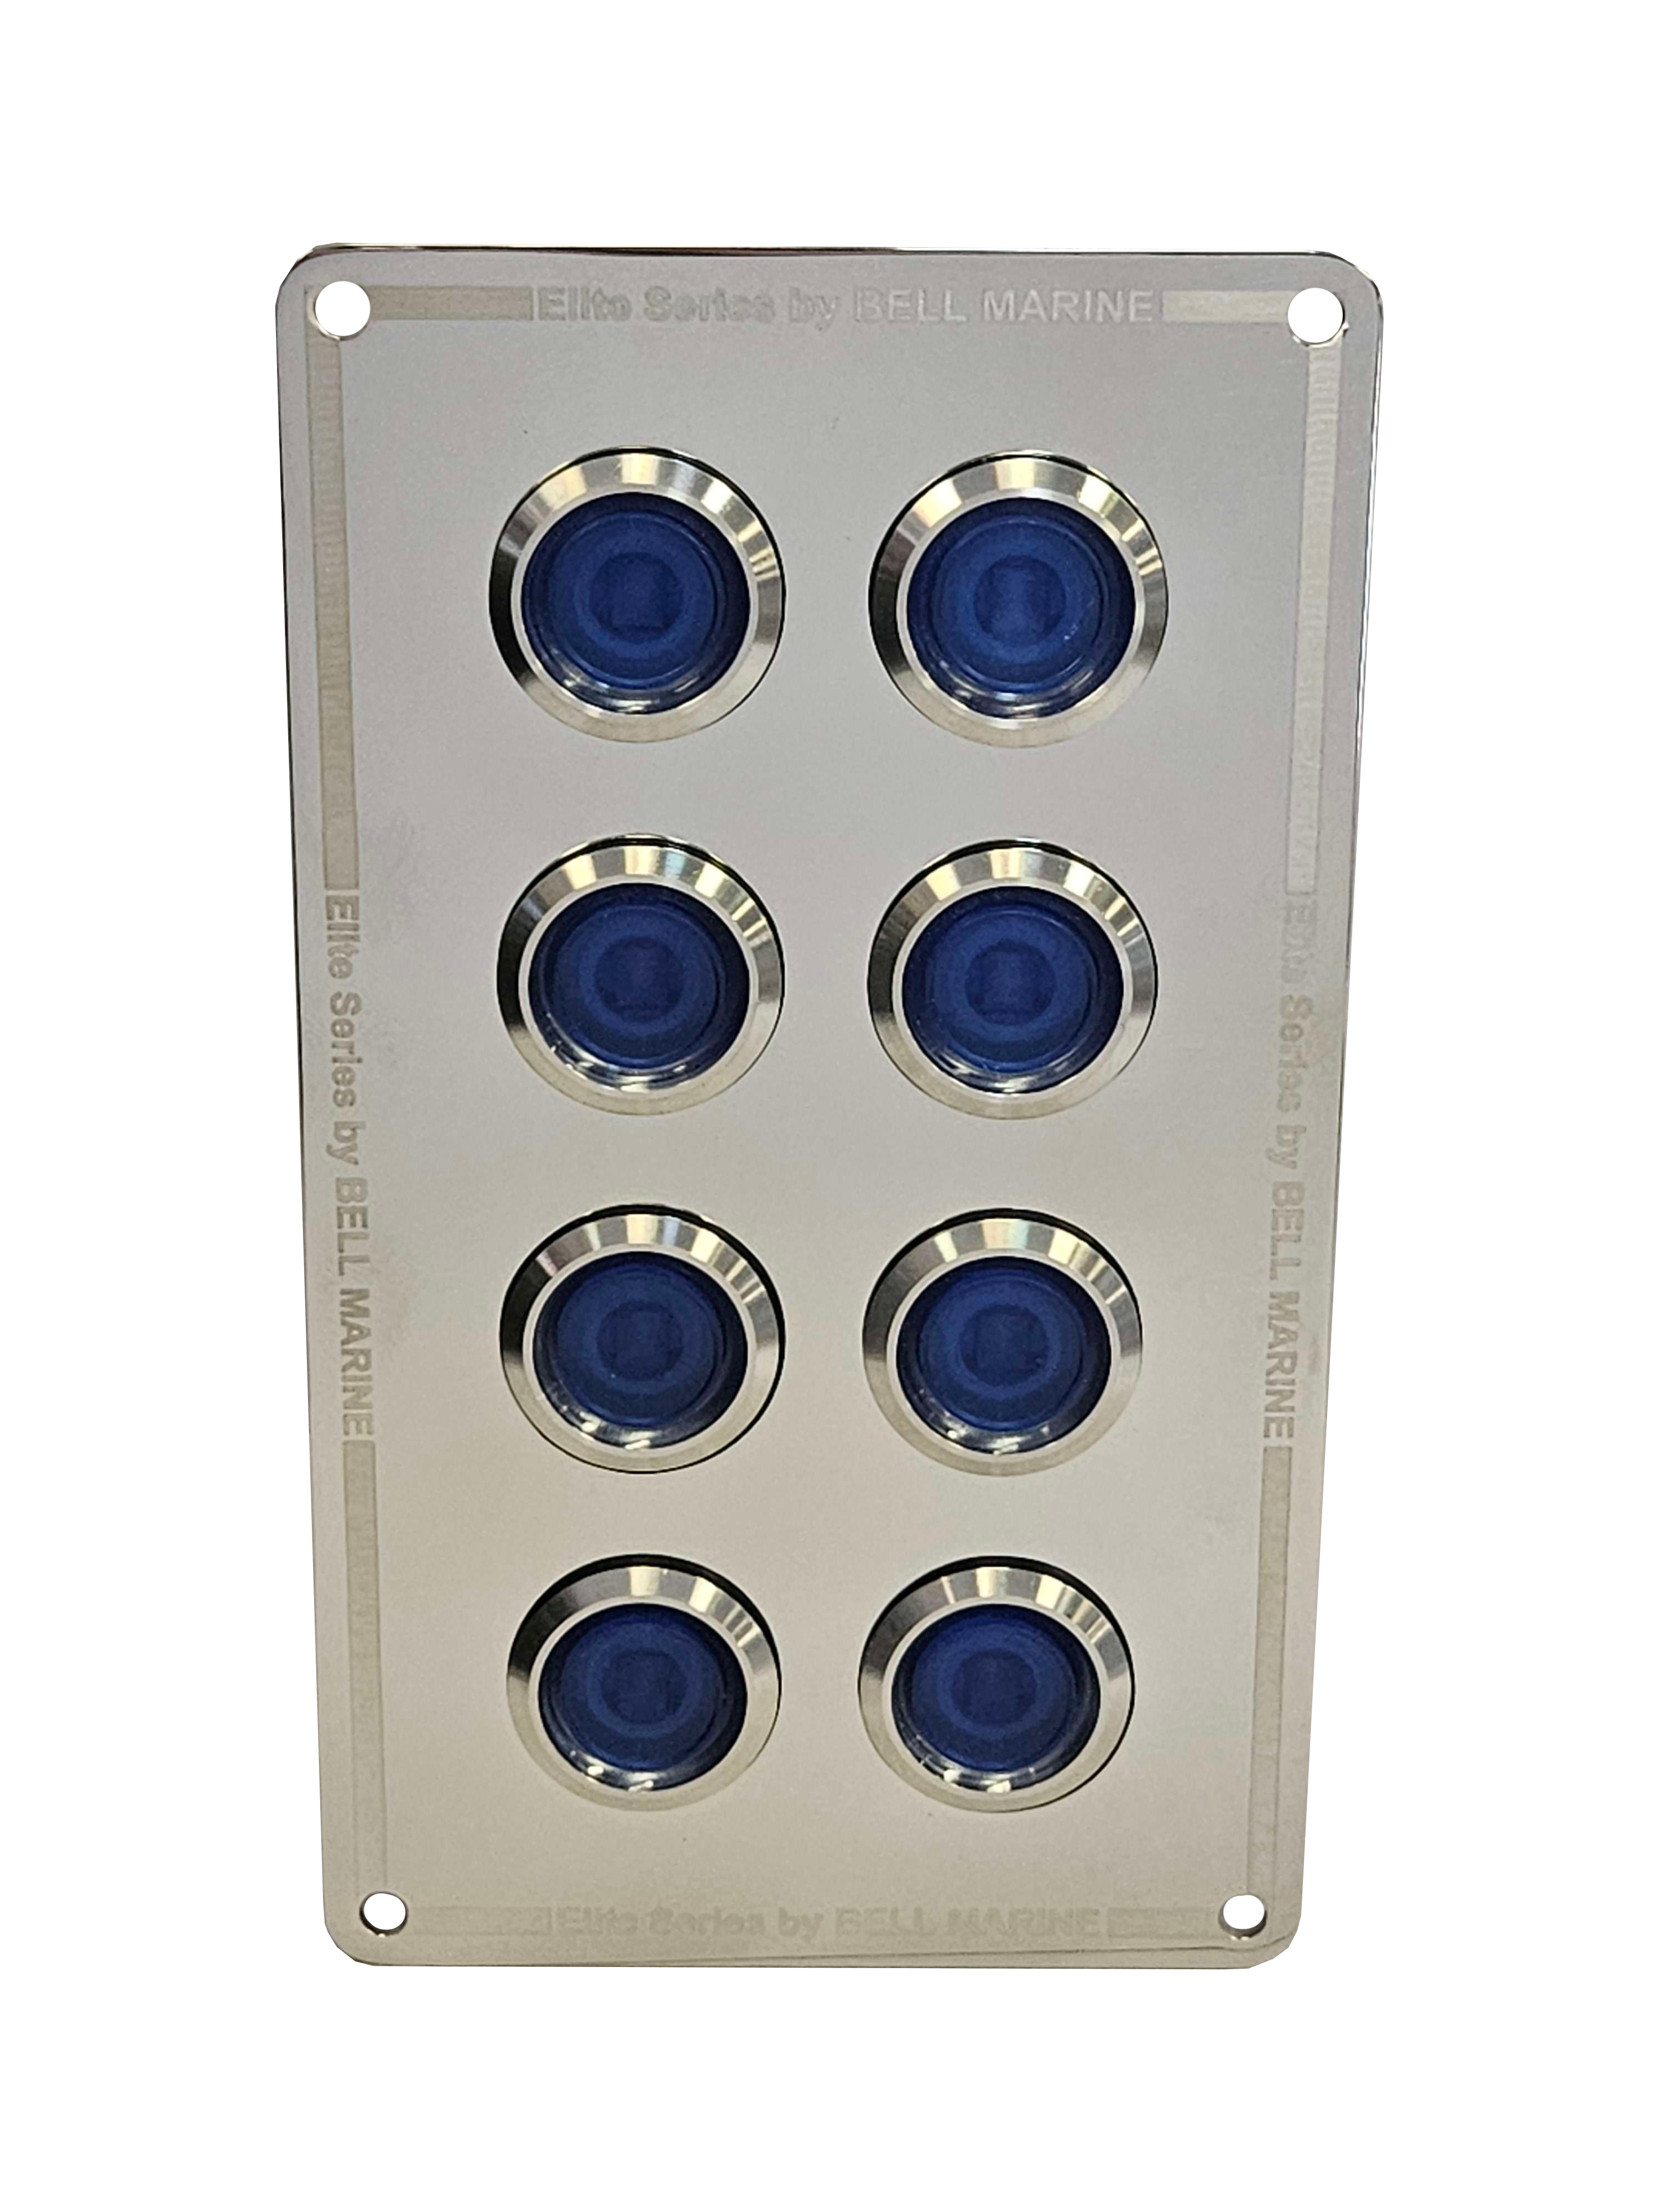 8 gang stainless steel switch panel with 15A backlit switches